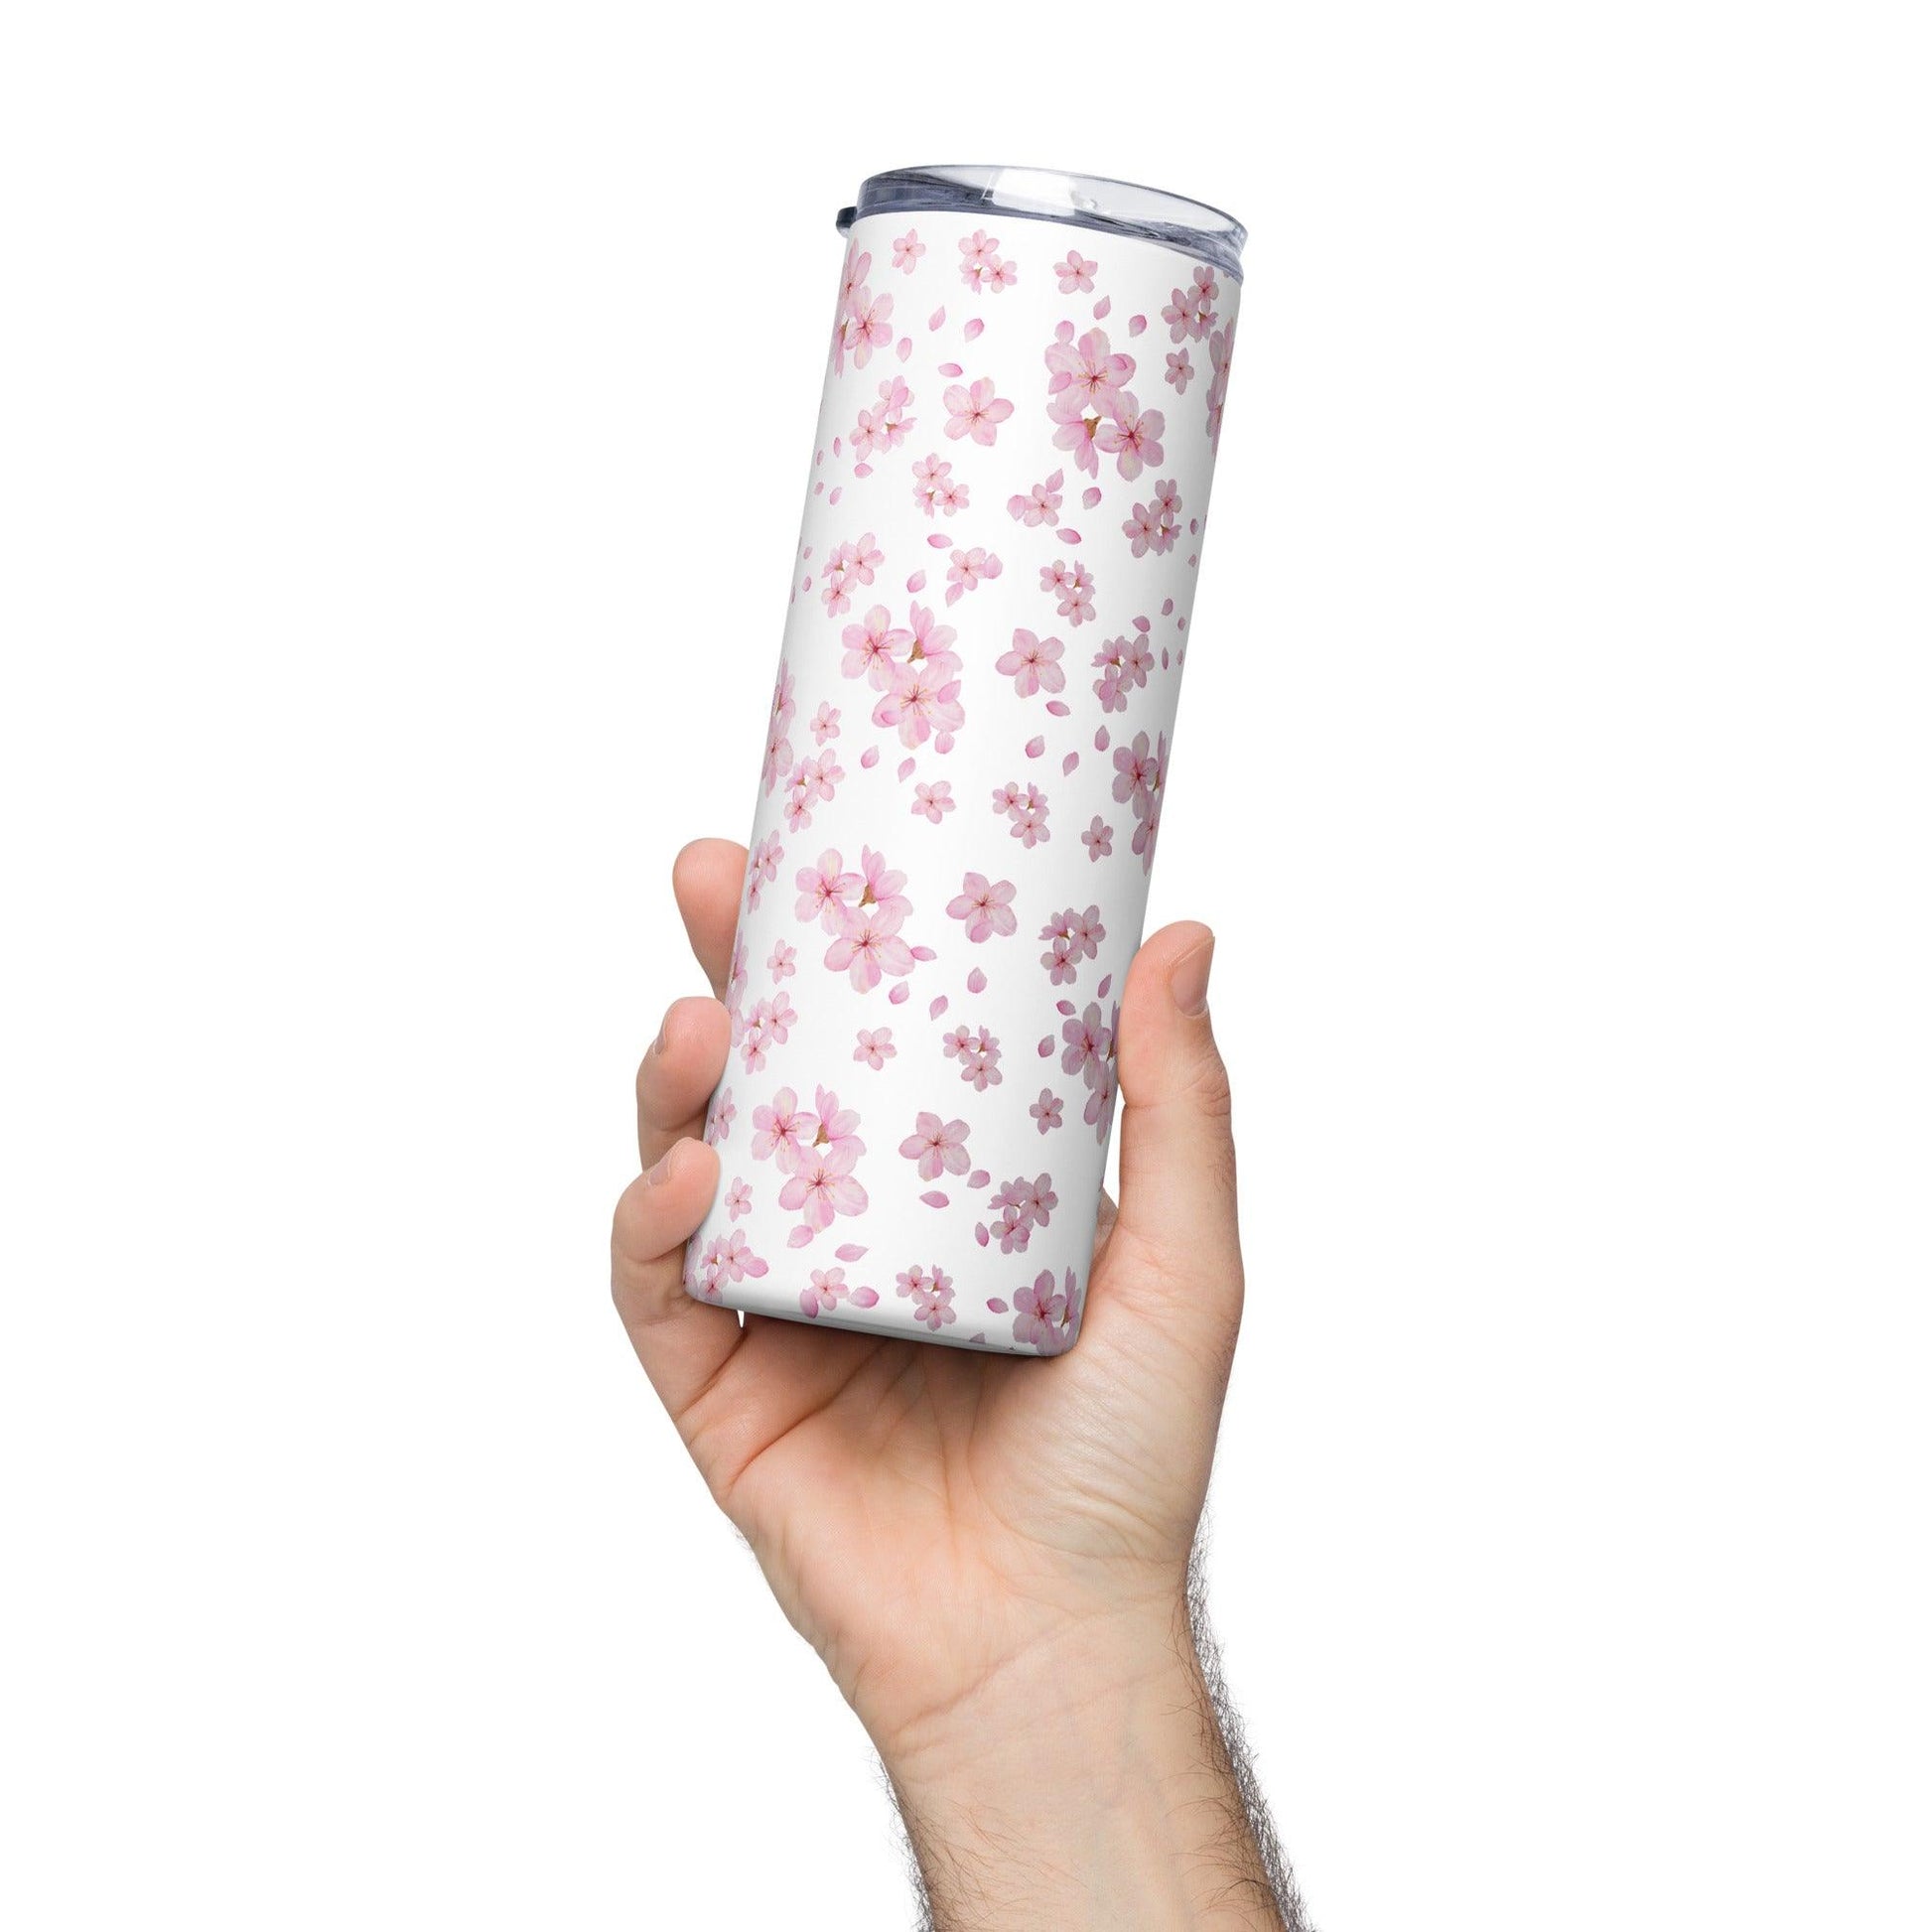 Cherry Blossom Stainless Steel Tumbler - Clover Collection Shop